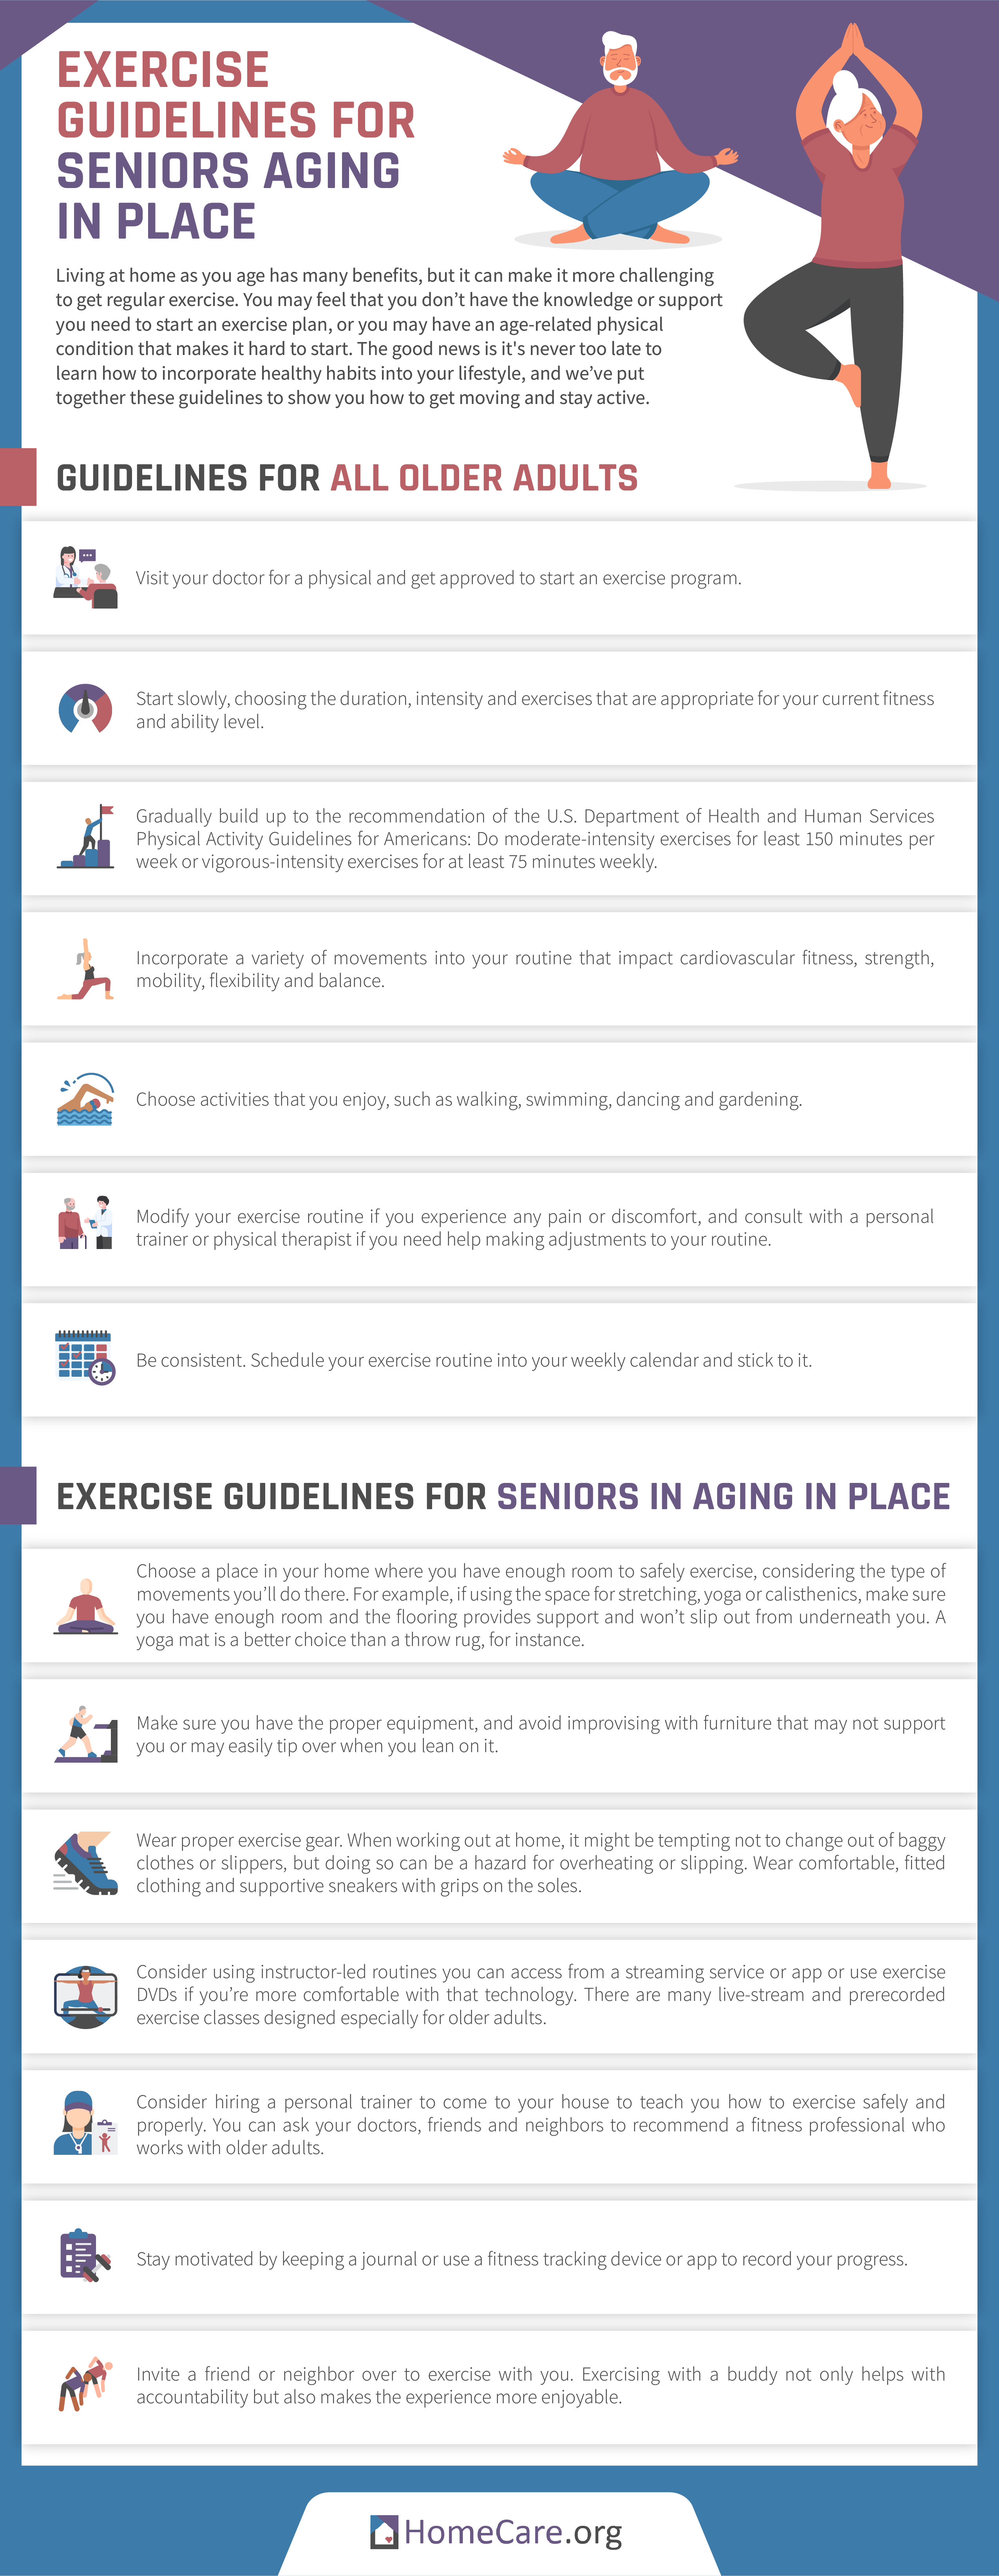 6 Exercises Aging Adults Shouldn't Do